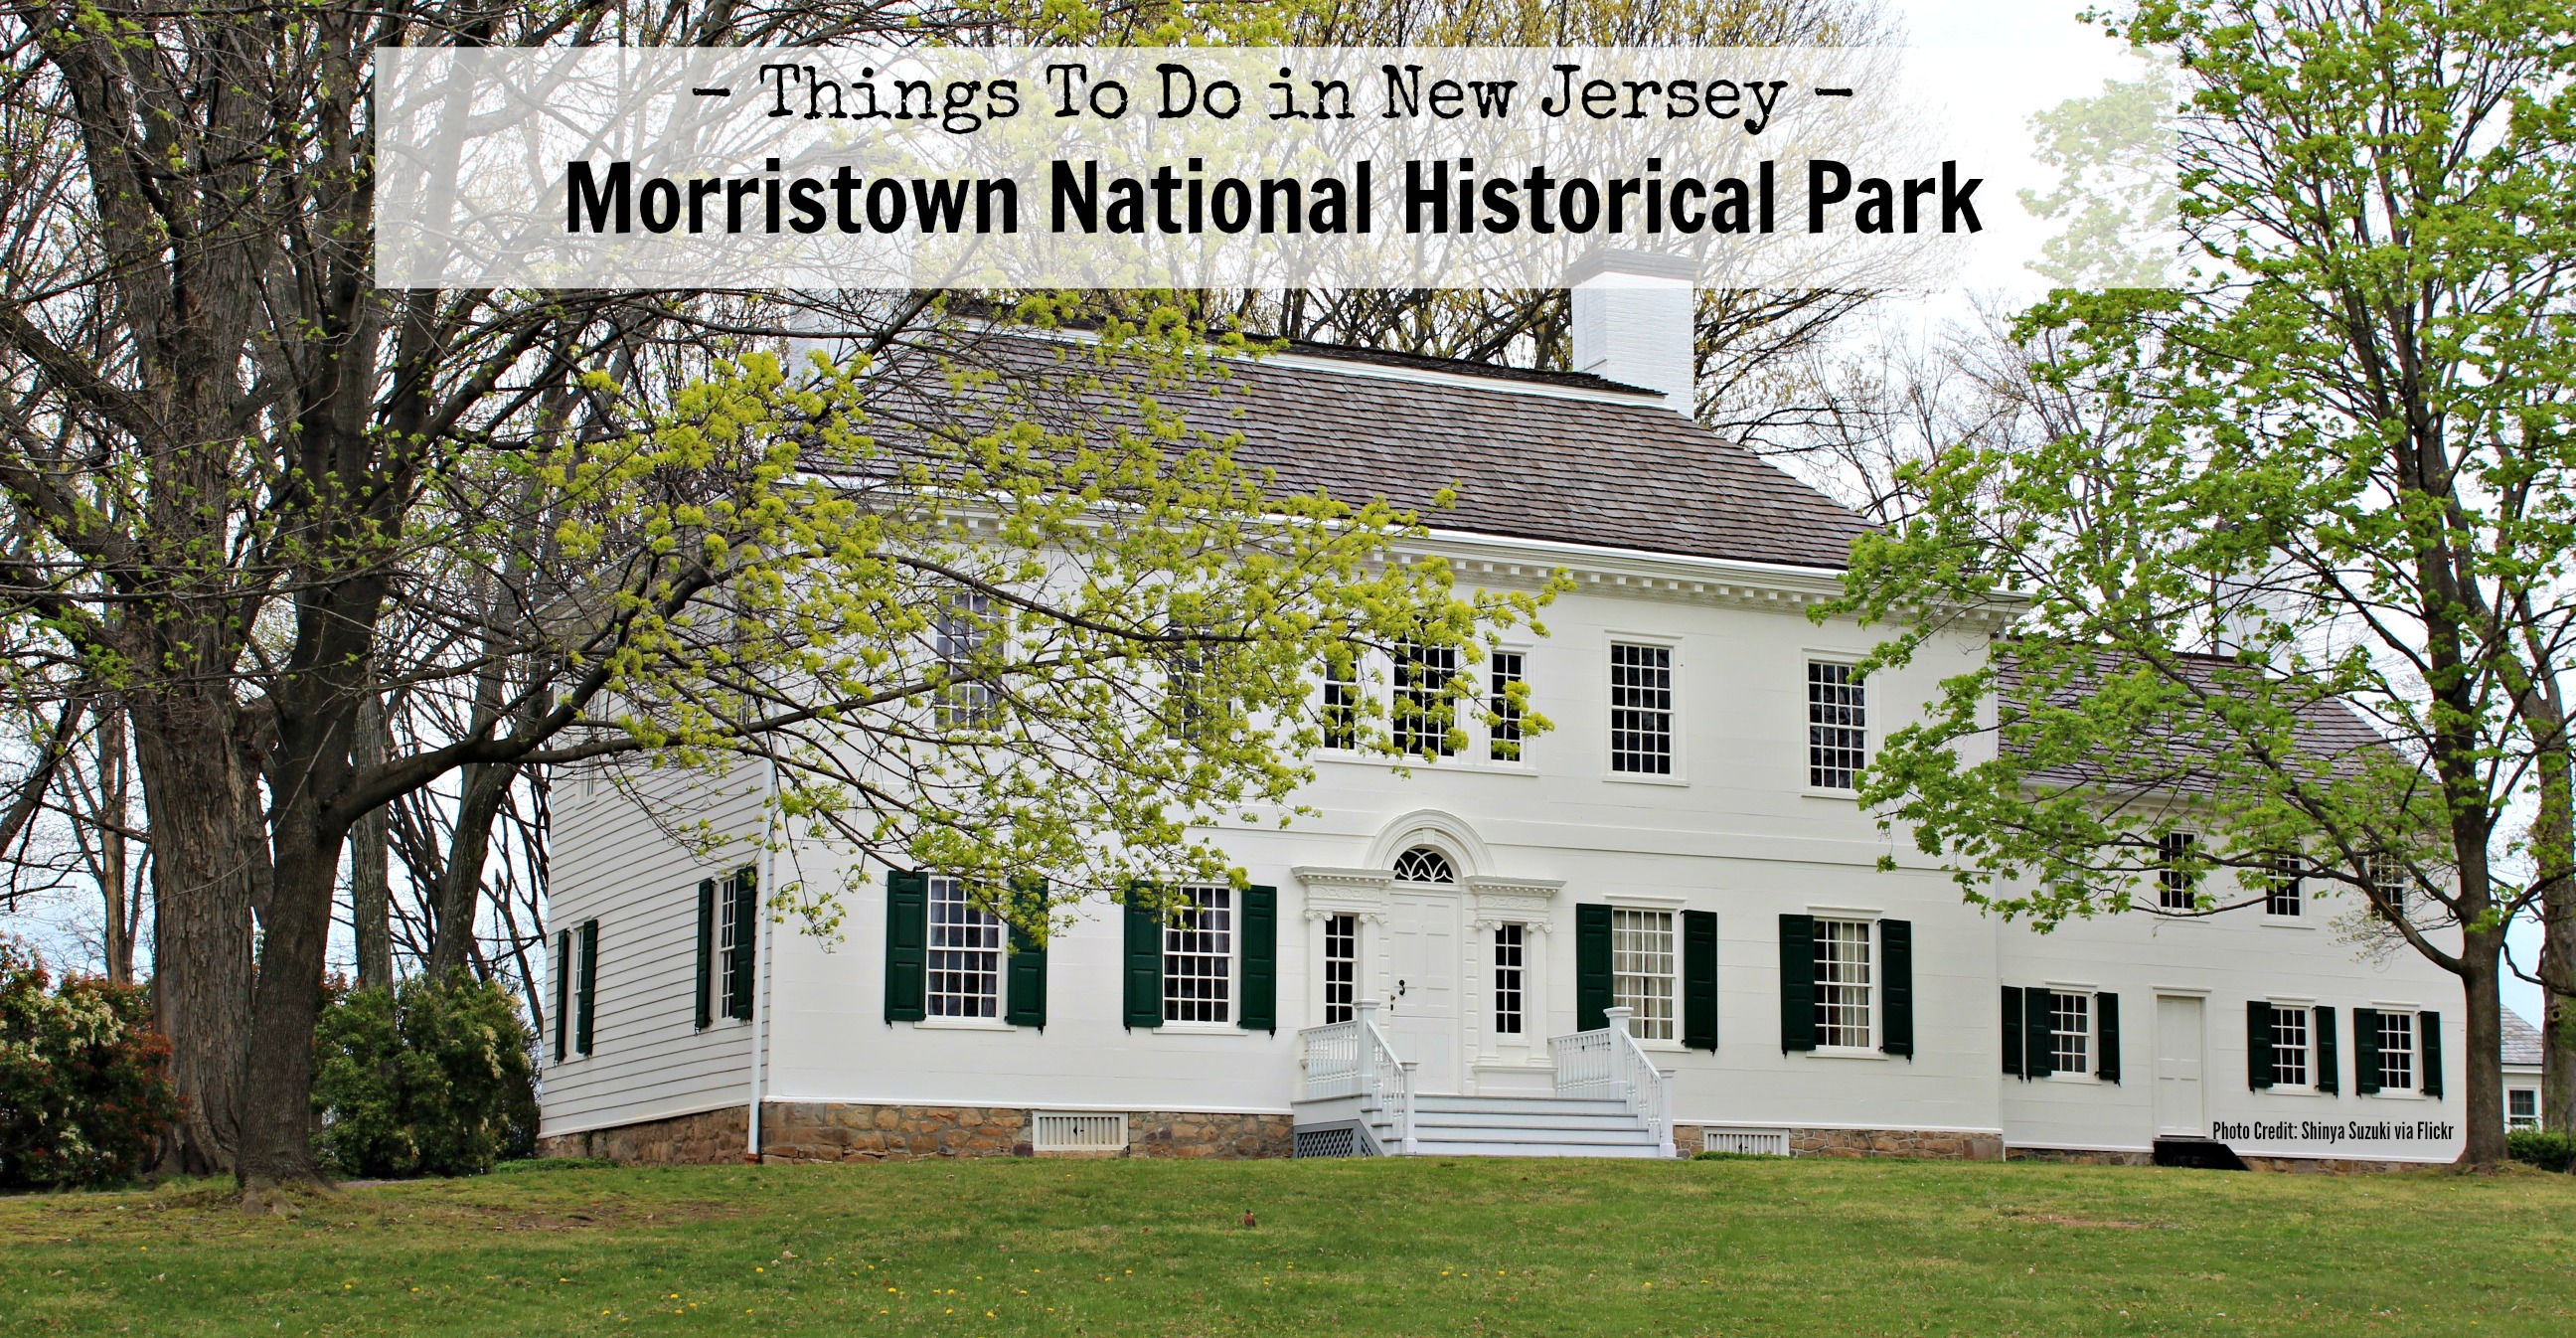 visit-morristown-national-historical-park-things-to-do-in-new-jersey